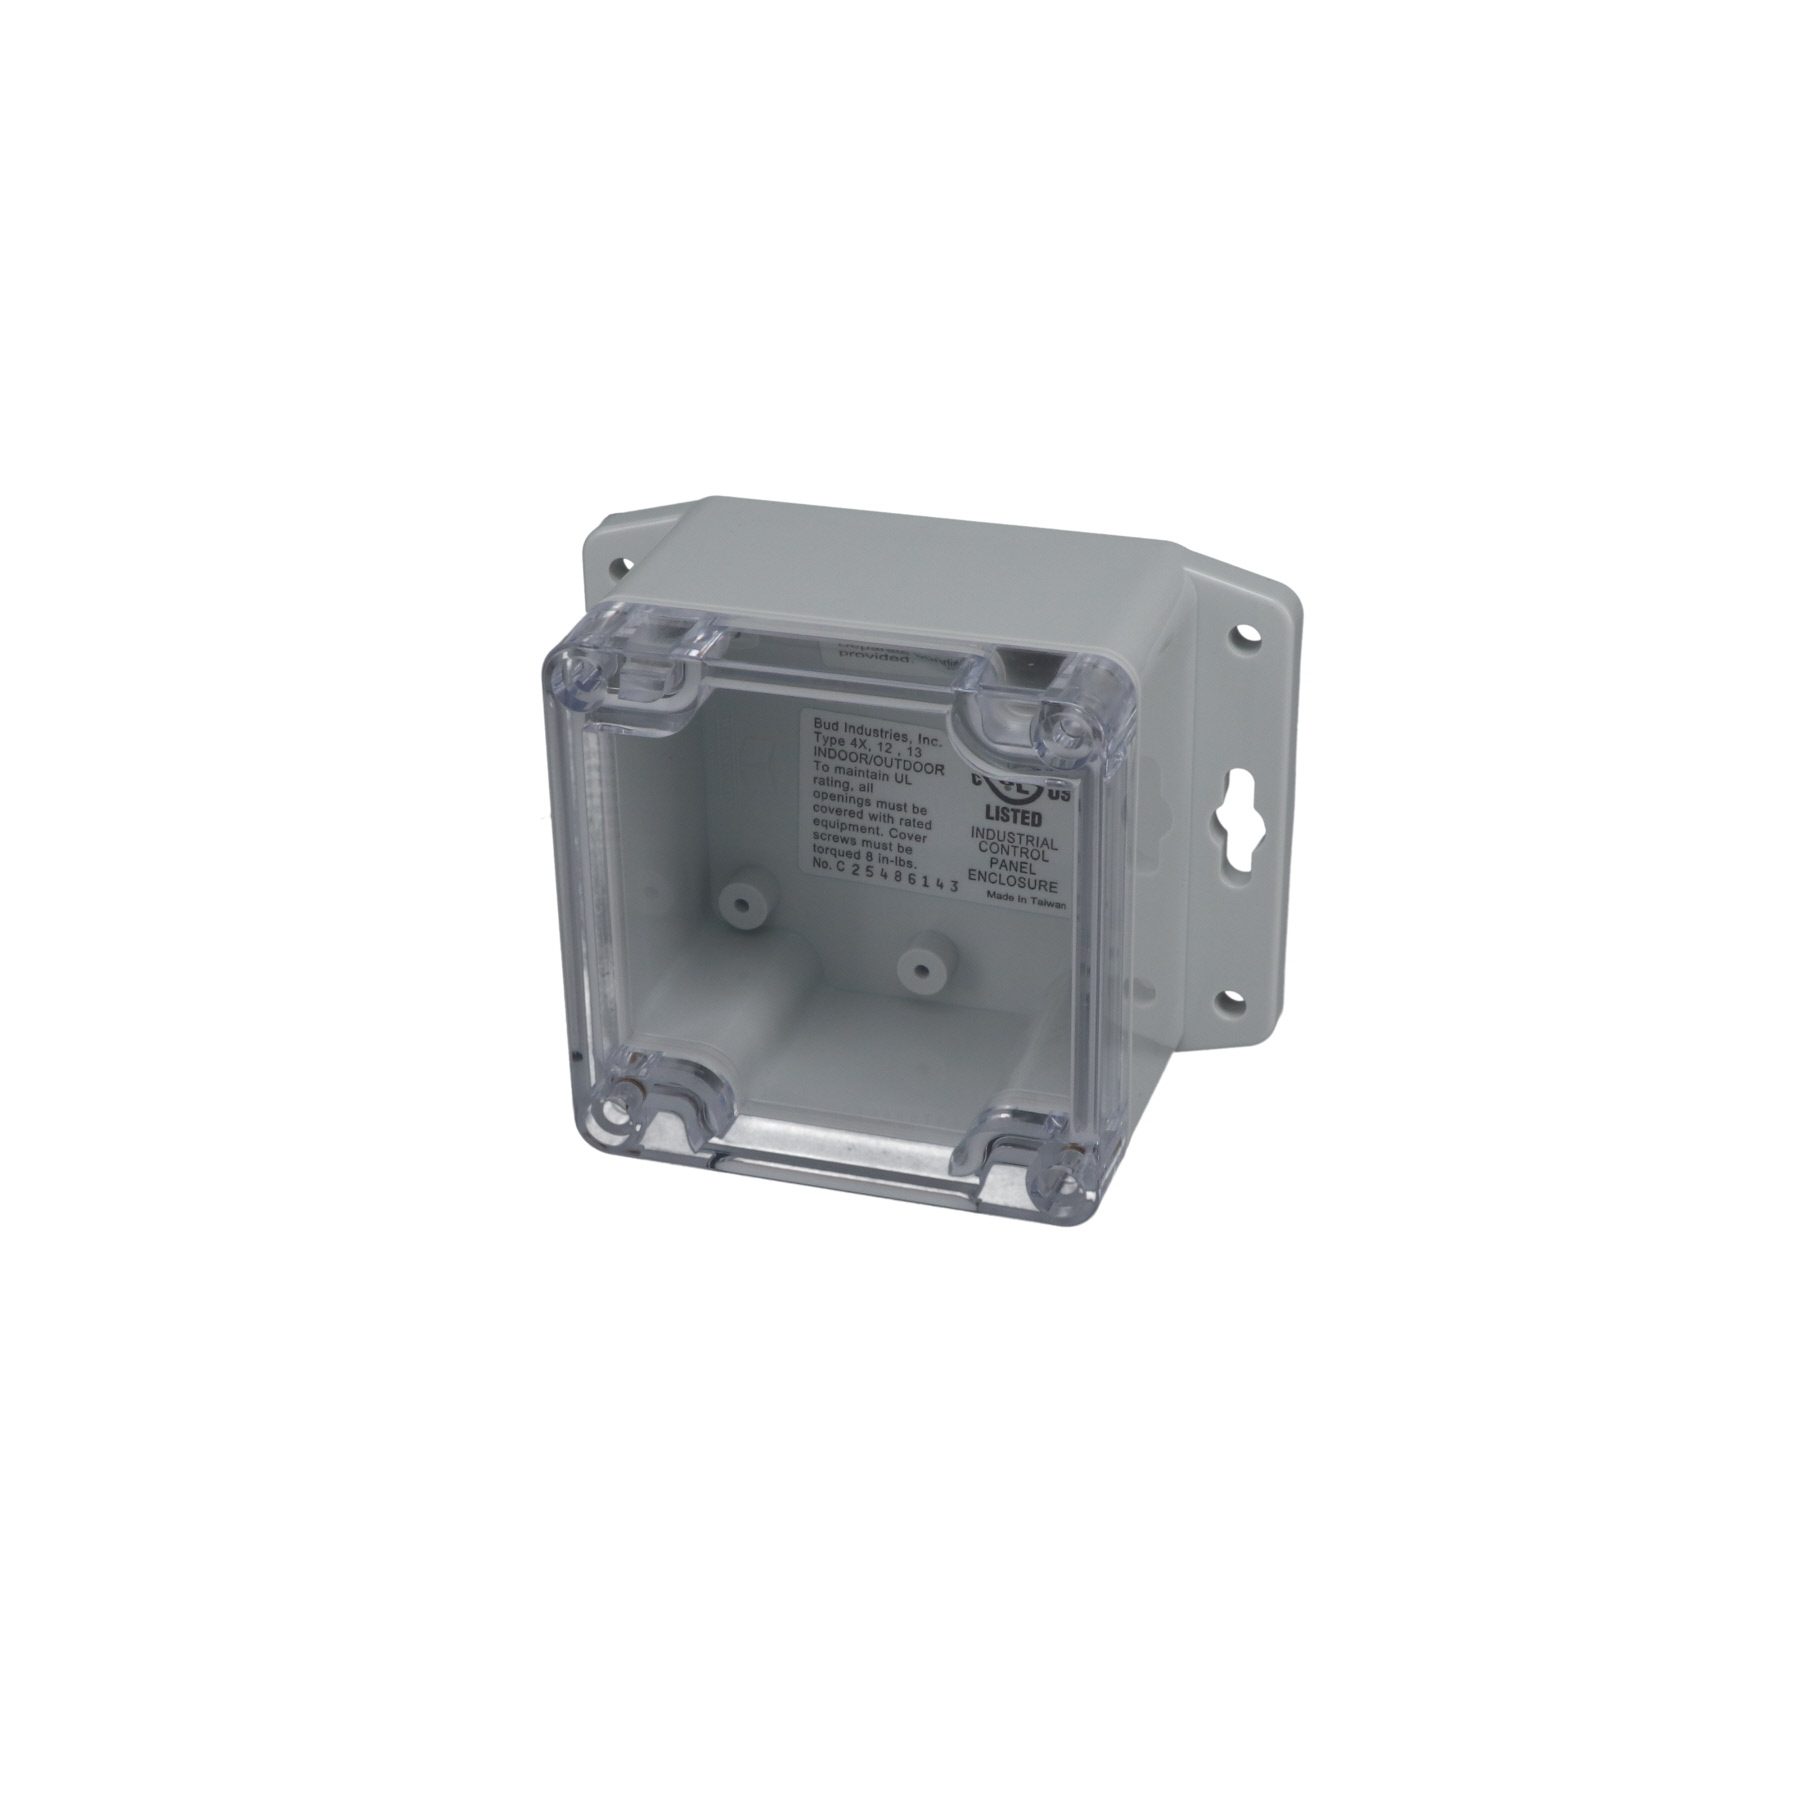 IP65 NEMA 4X Box with Clear Cover and Mounting Brackets PN-1331-CMB